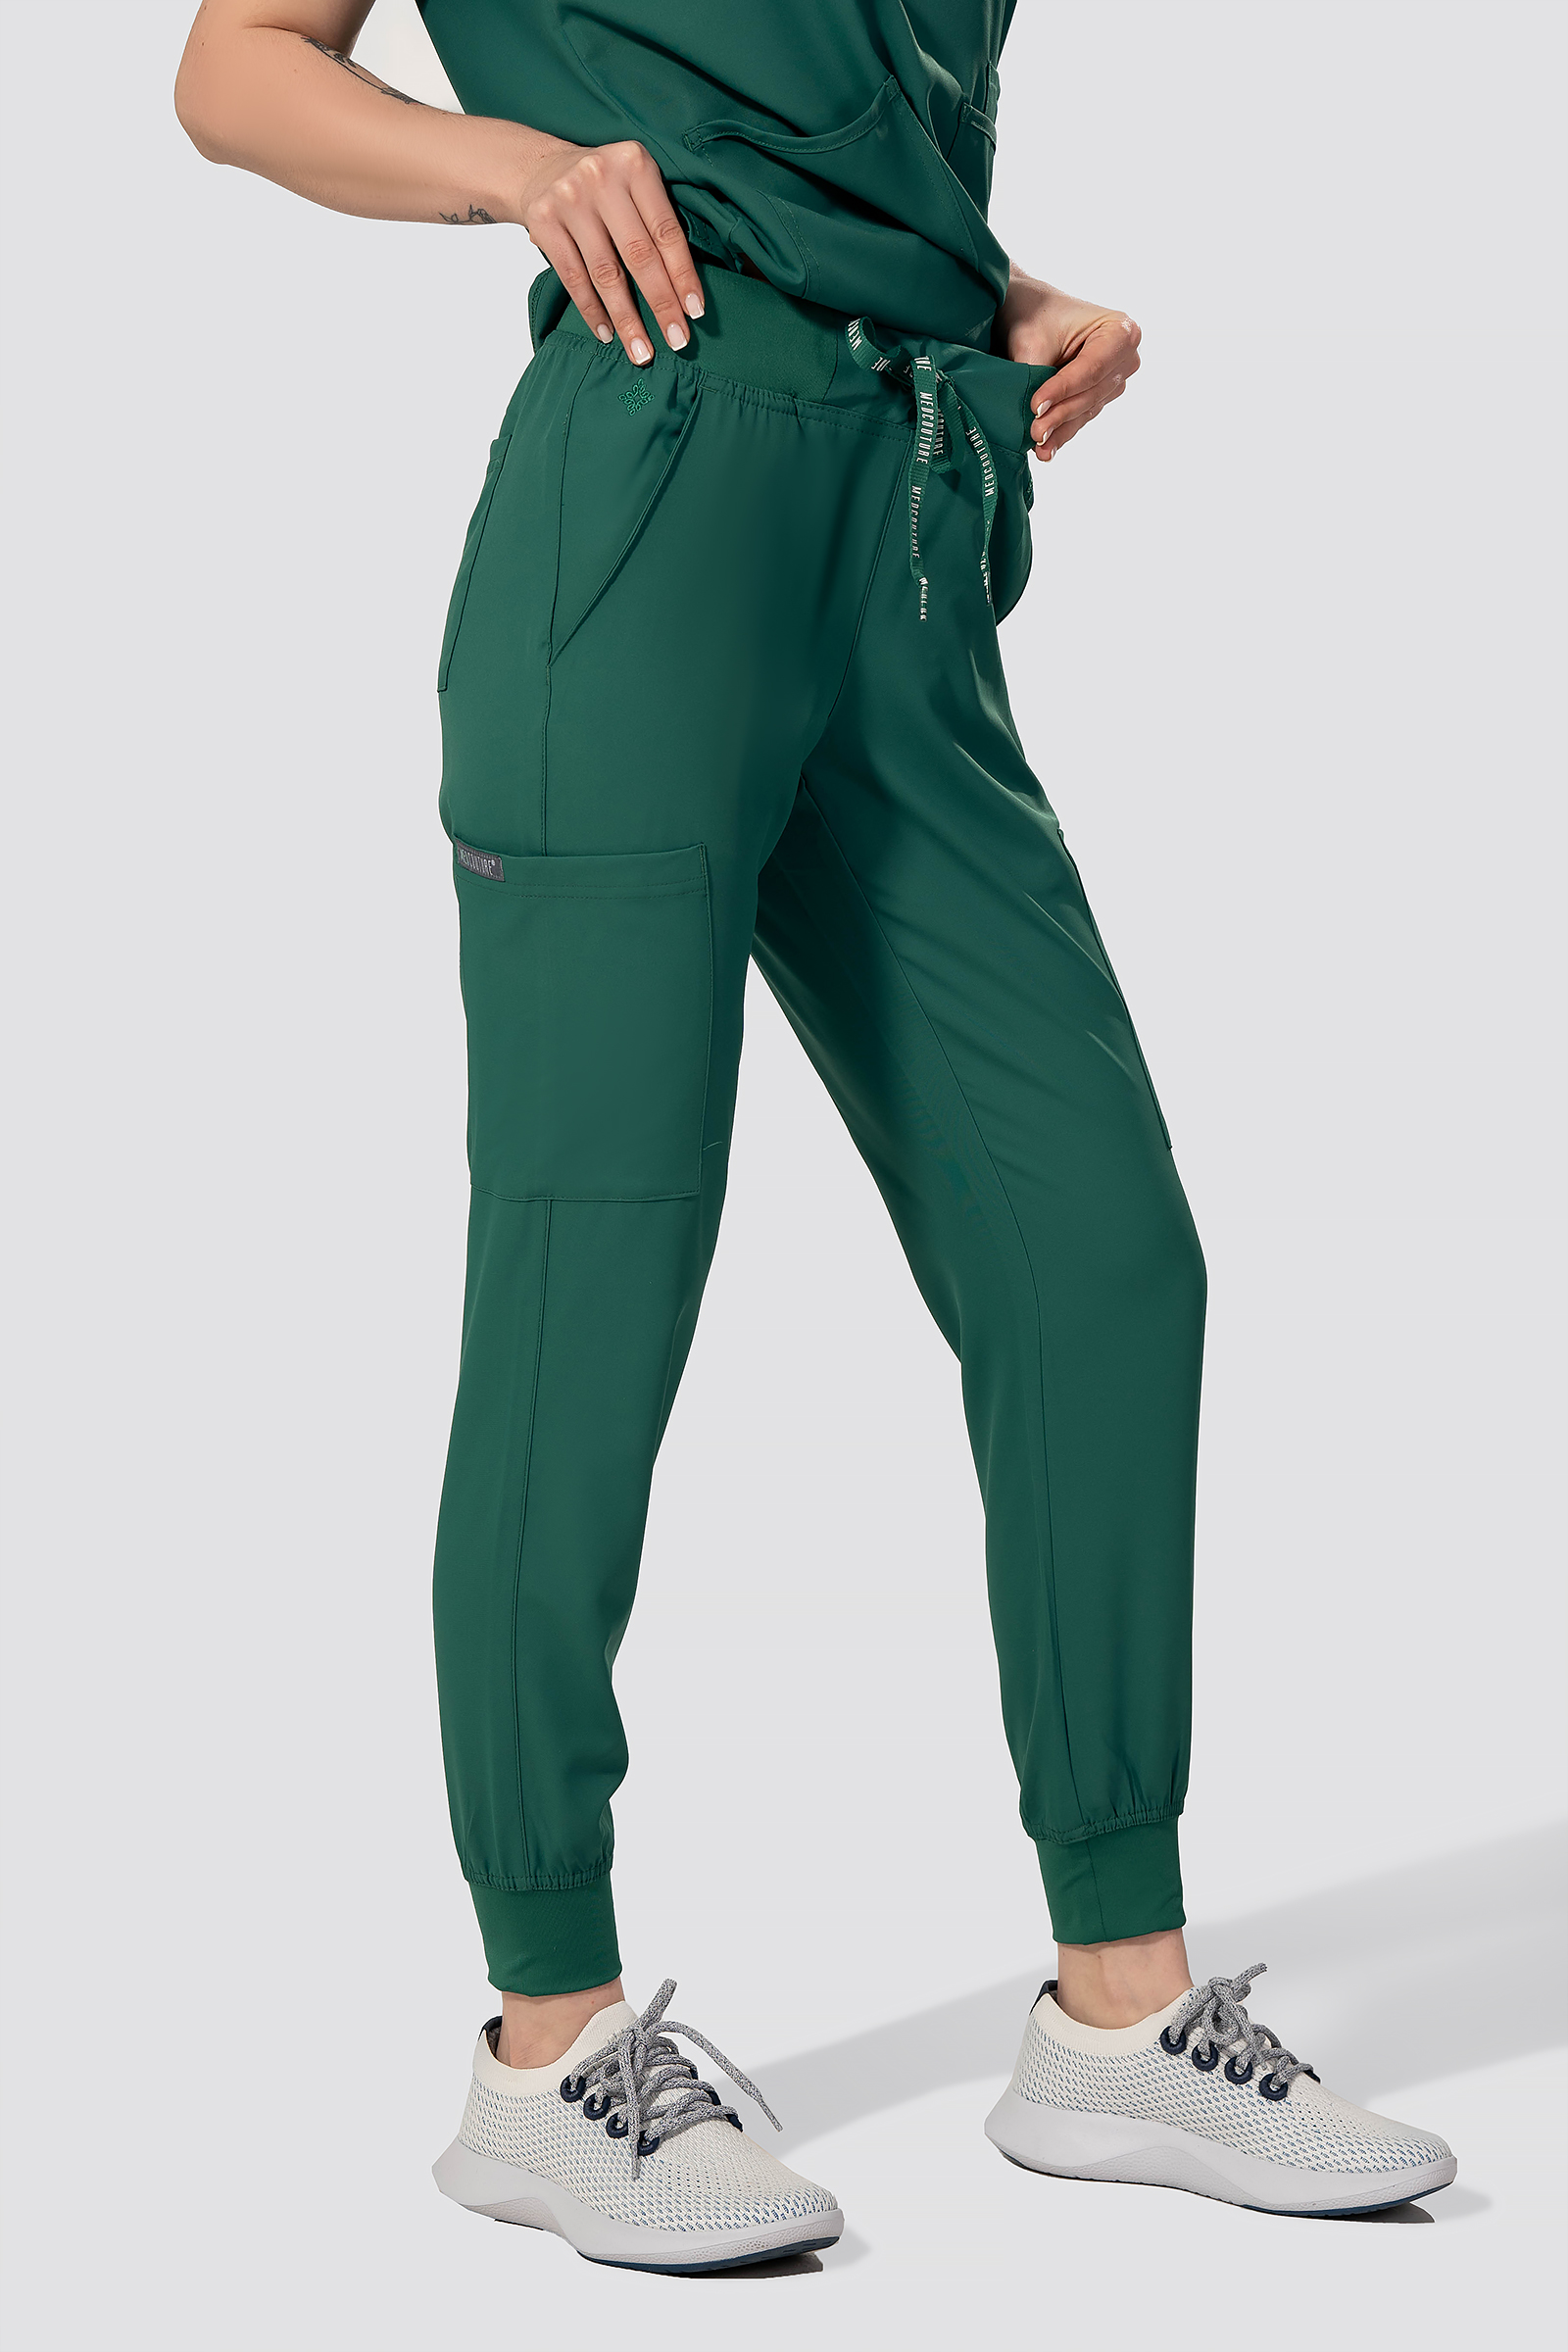 2711 Med Couture Insight Women's Jogger Scrub Pants 